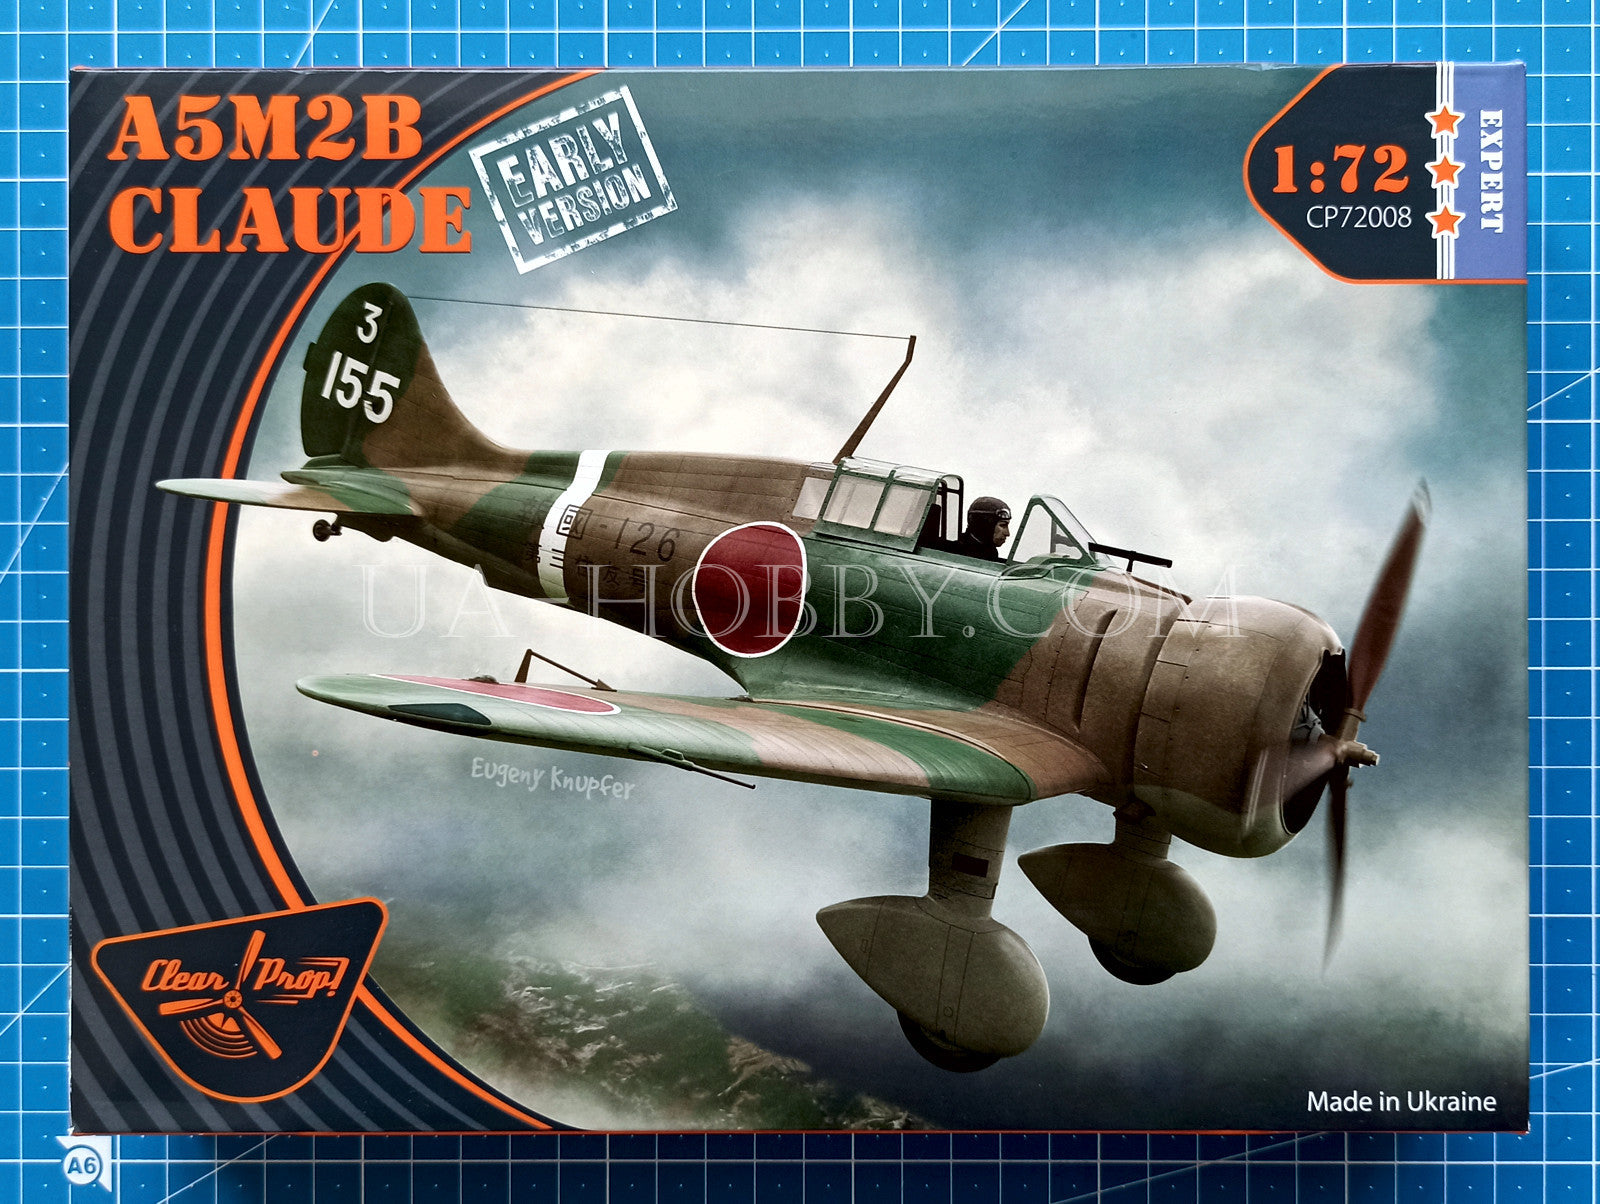 1/72 Mitsubishi A5M2b Claude (Early Version) Expert kit. Clear Prop! CP72008